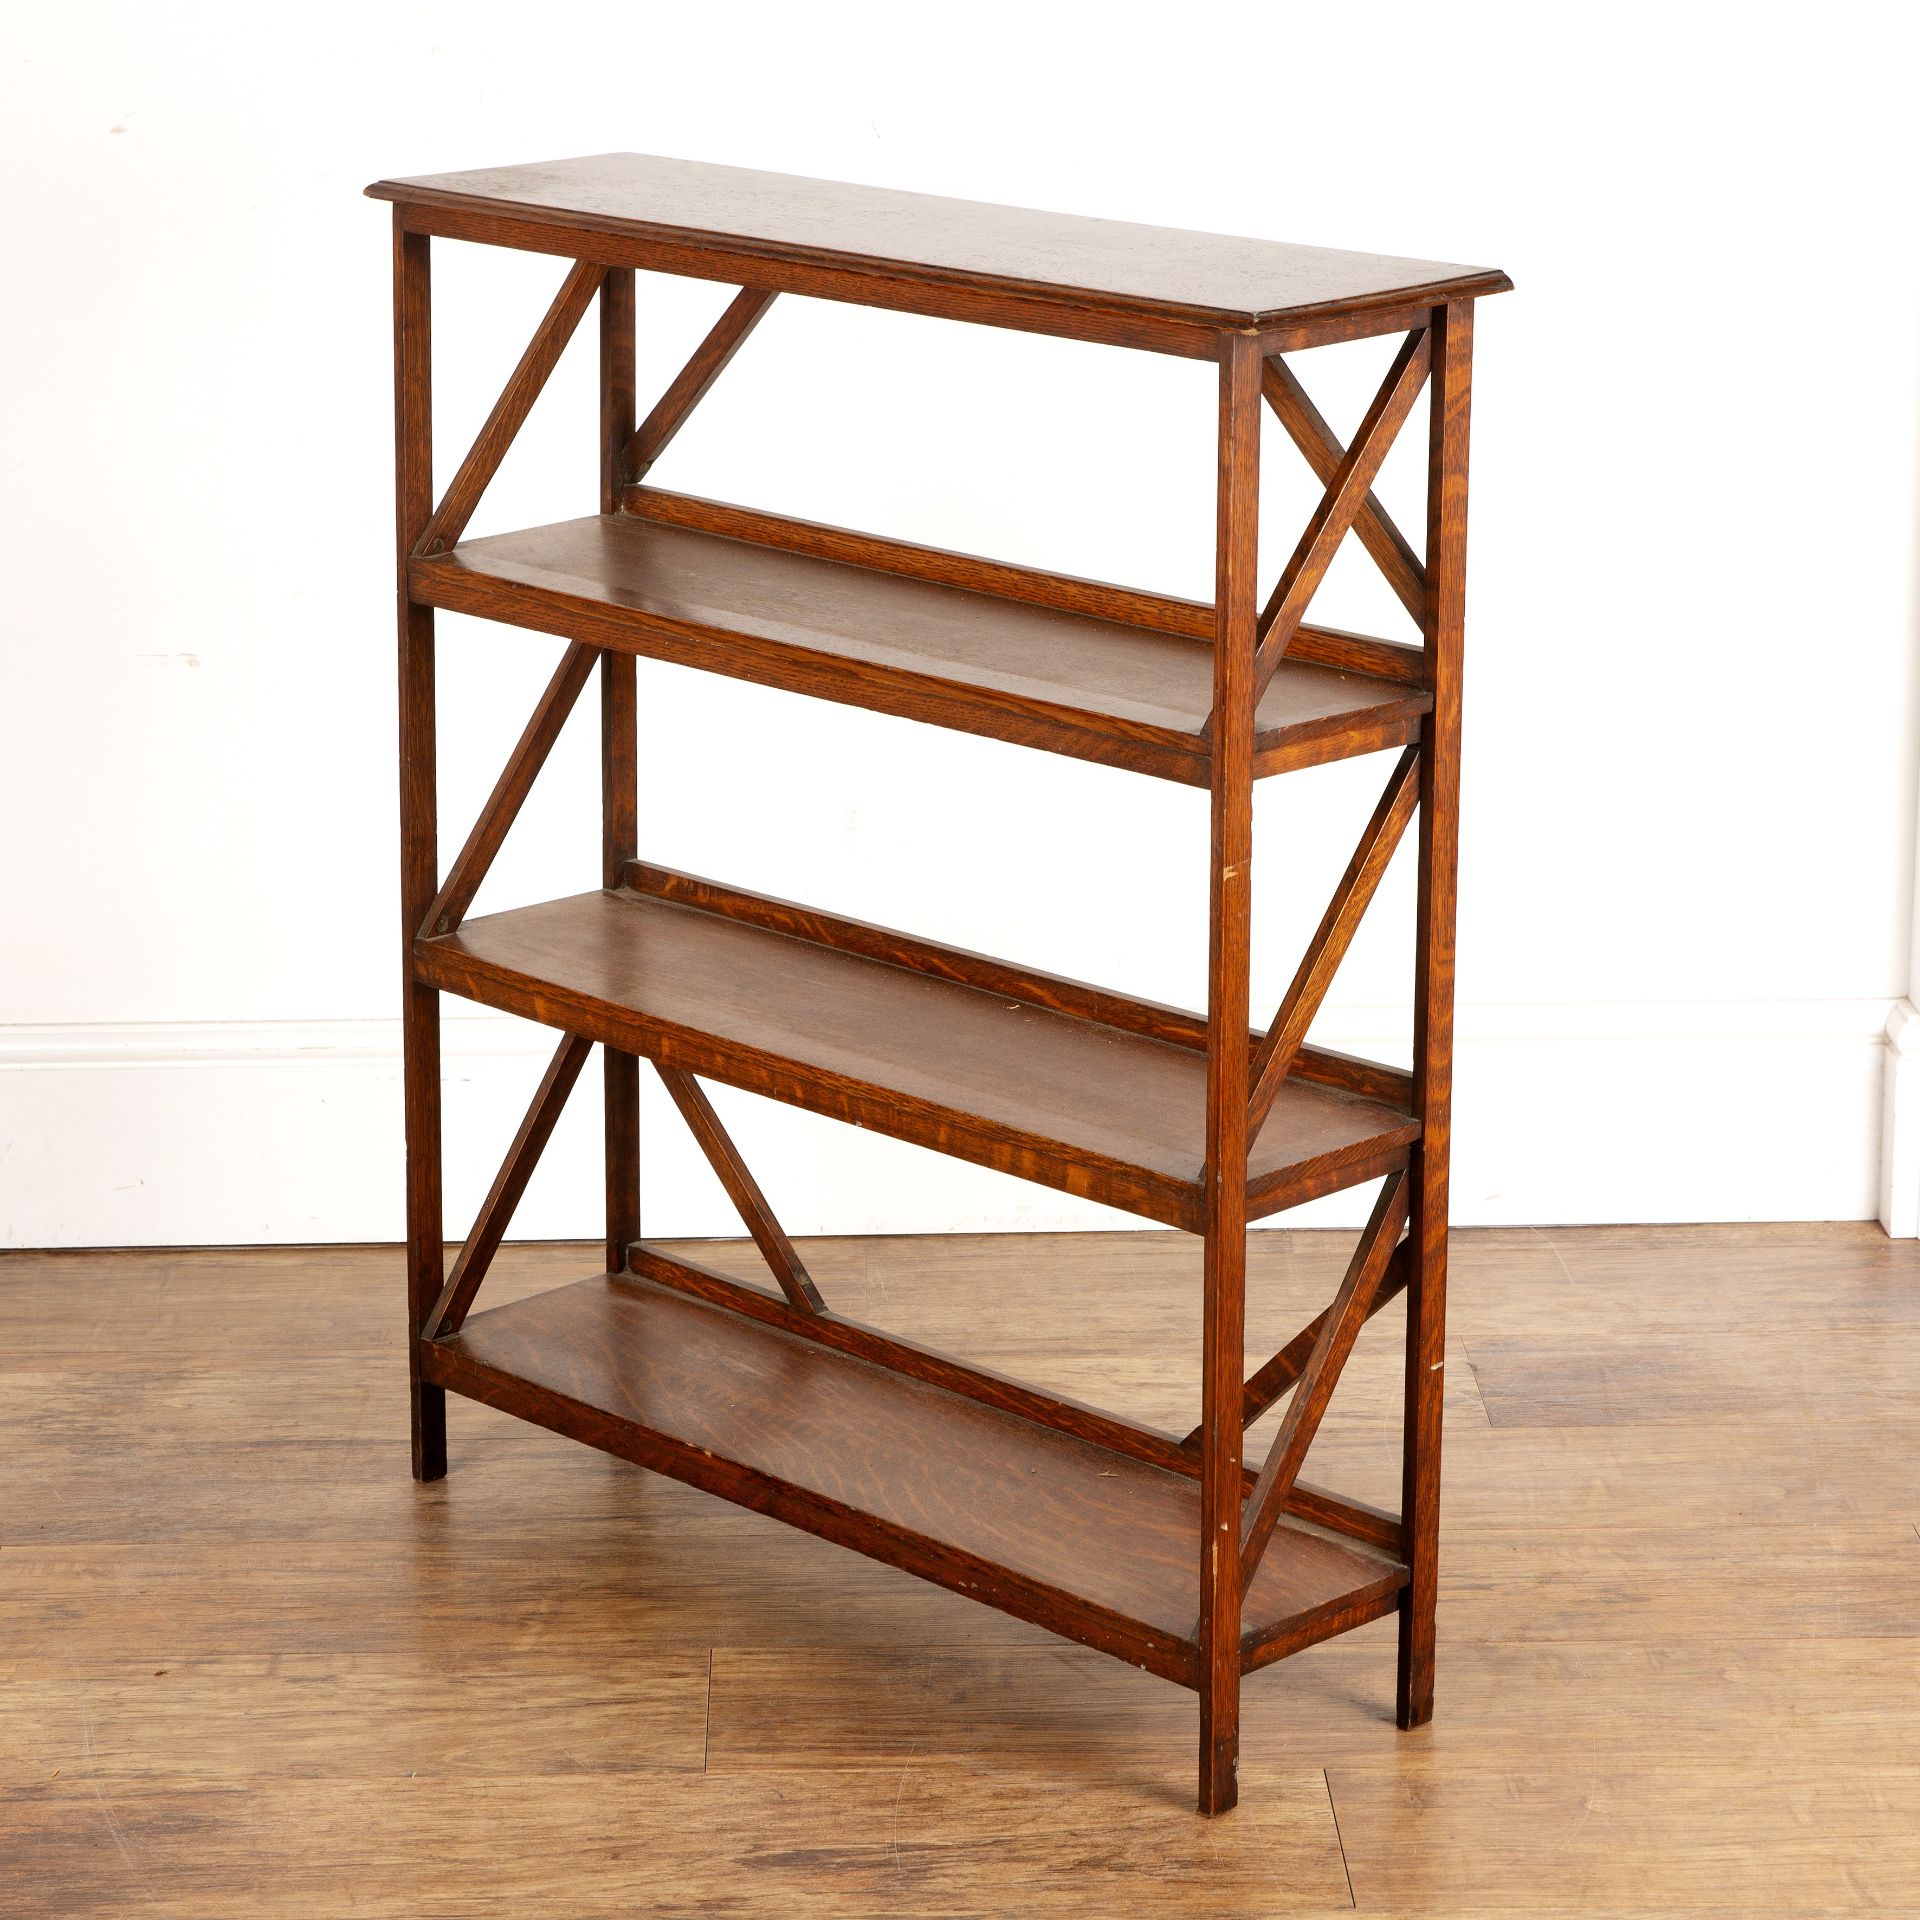 In the manner of Heals oak, open bookcase, with diagonal supports, 76cm wide x 86cm high x 20.5cm - Image 3 of 4